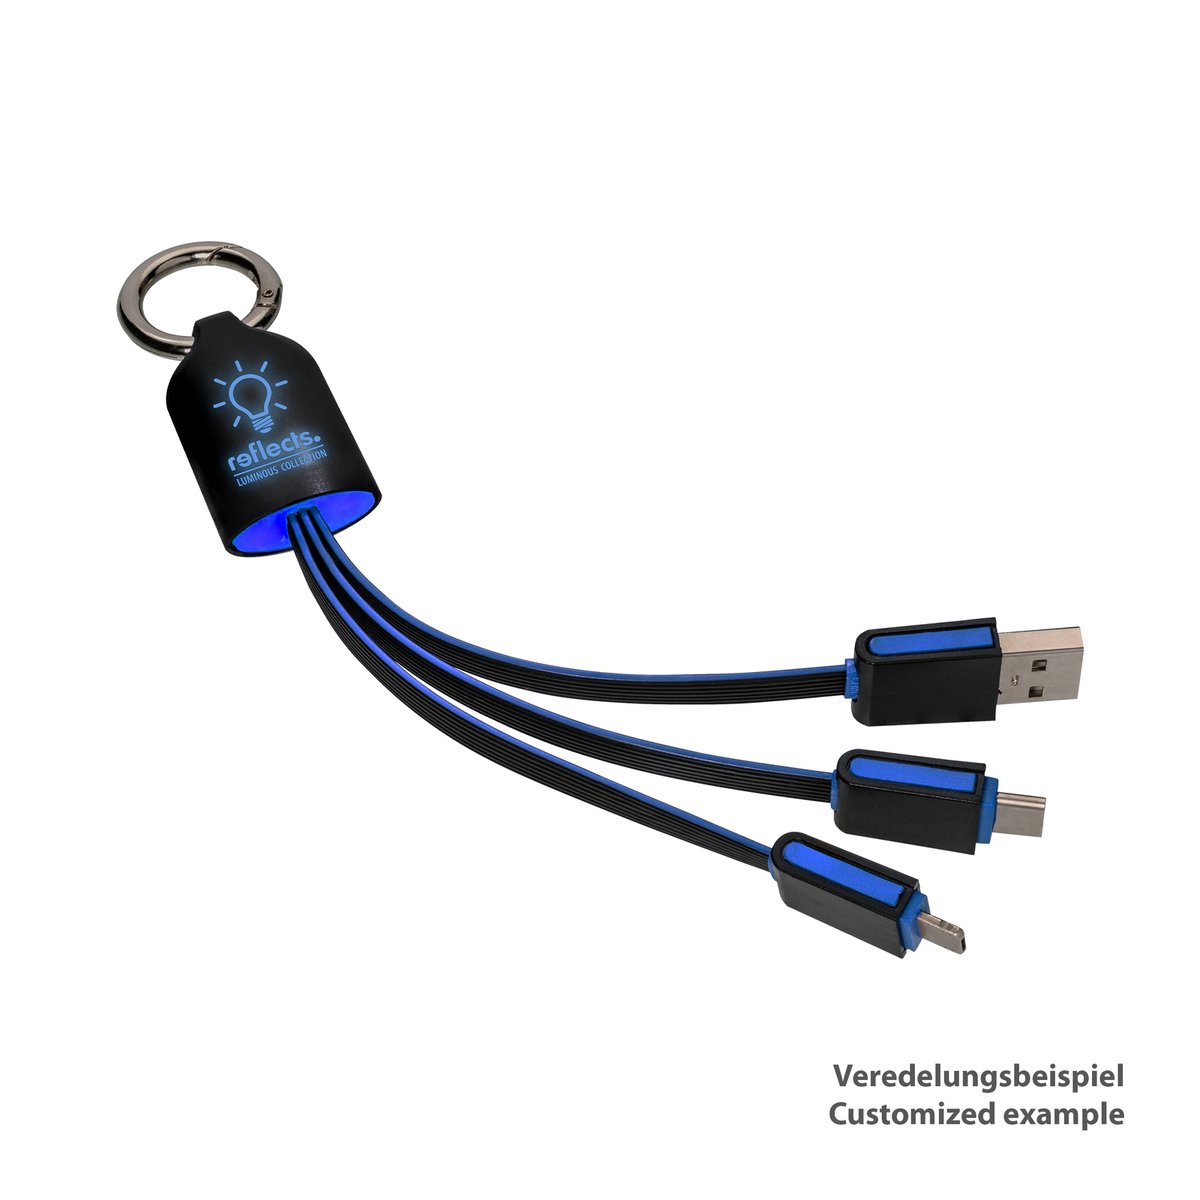 3-in-1 Charging Cable REEVES-ABILENE black/blue